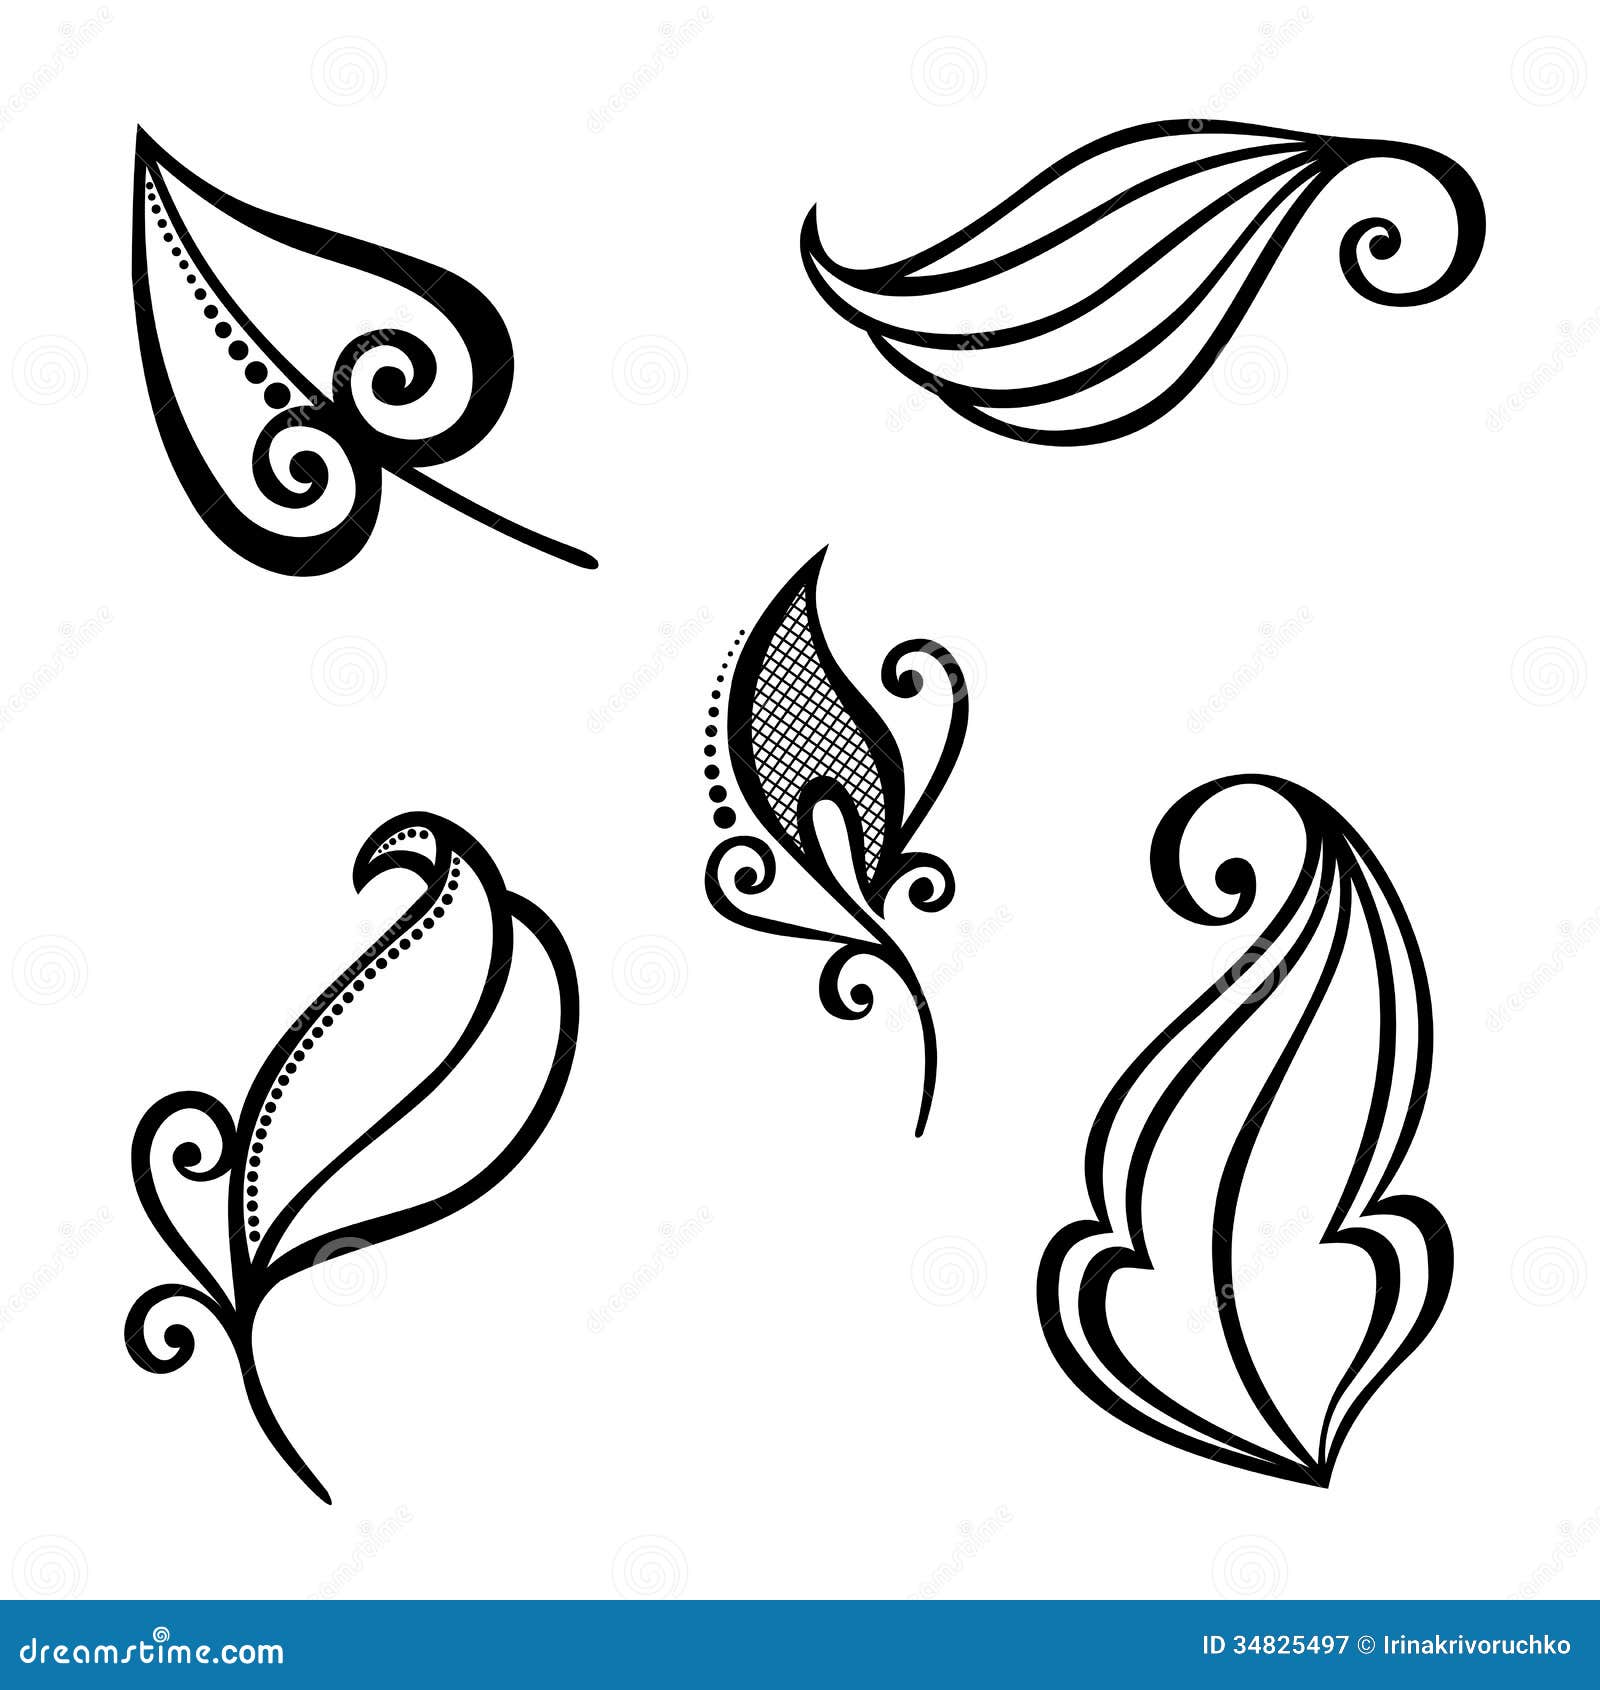 Decorative Leaf With Ornament Stock Vector Illustration 